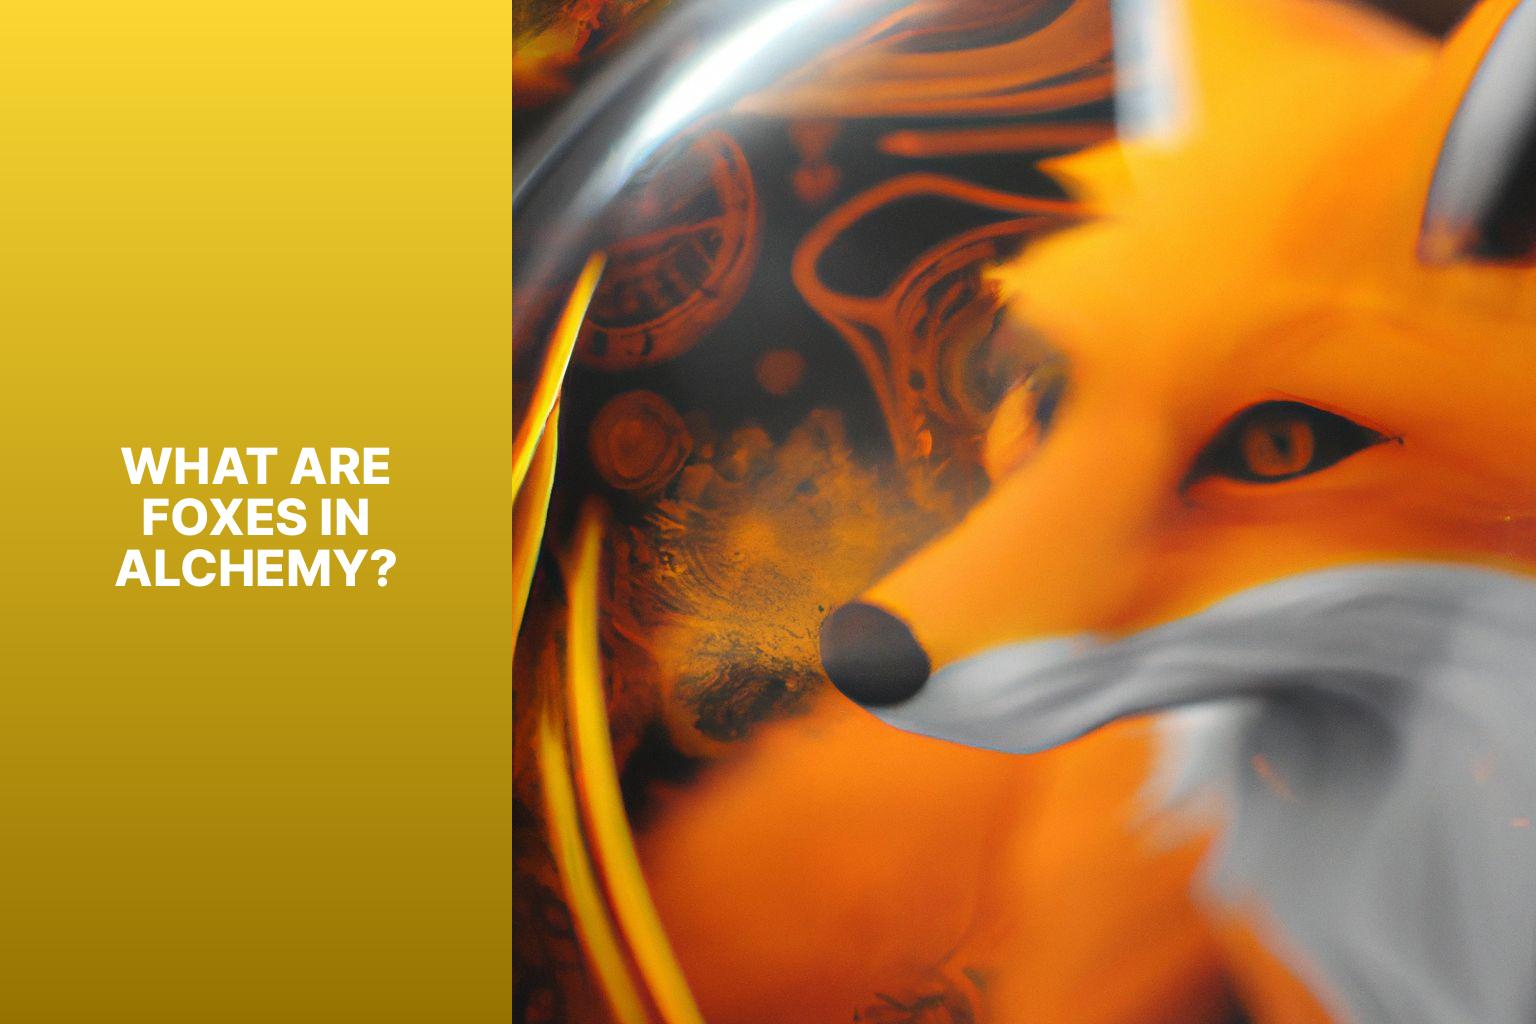 What are Foxes in Alchemy? - Fox Myths in Alchemy 